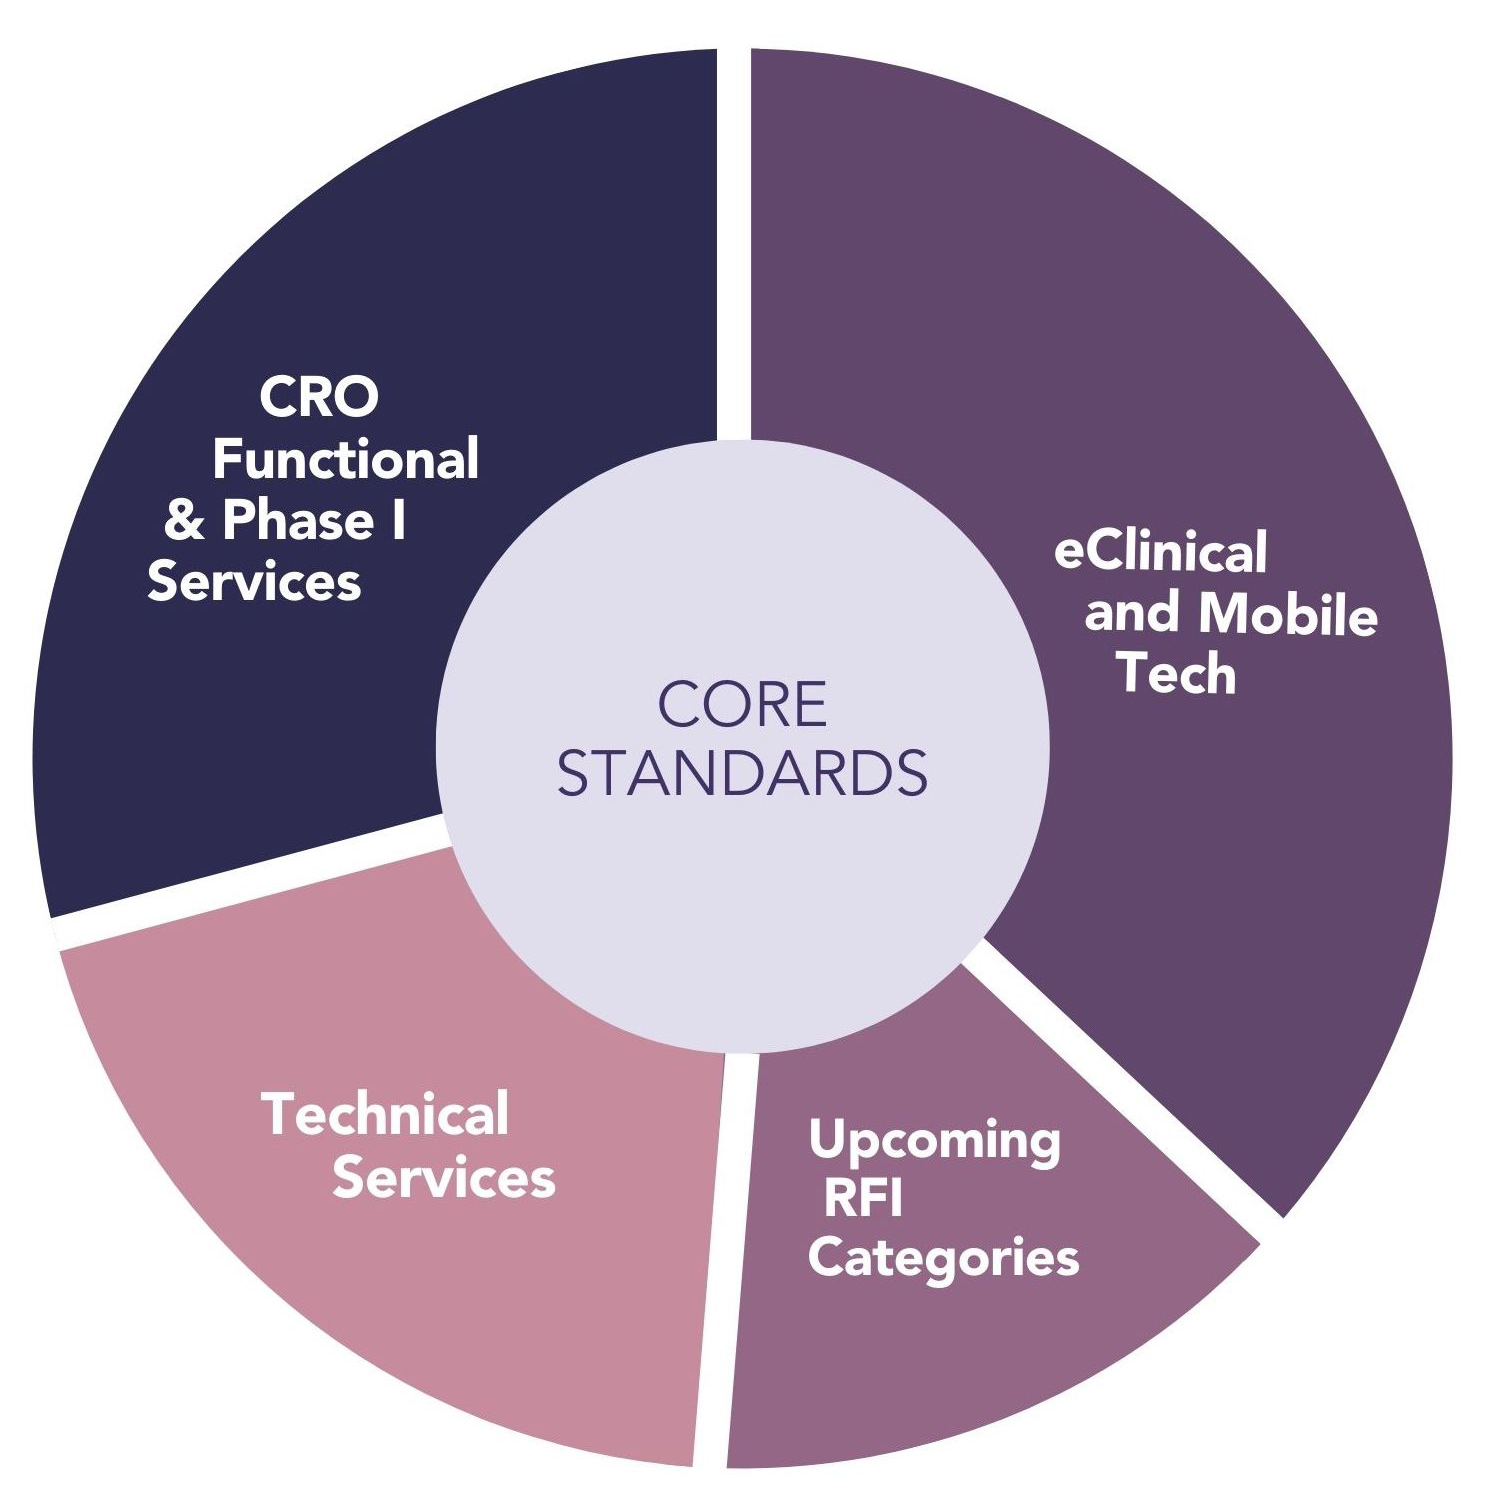 CRO eClinical Core Standards